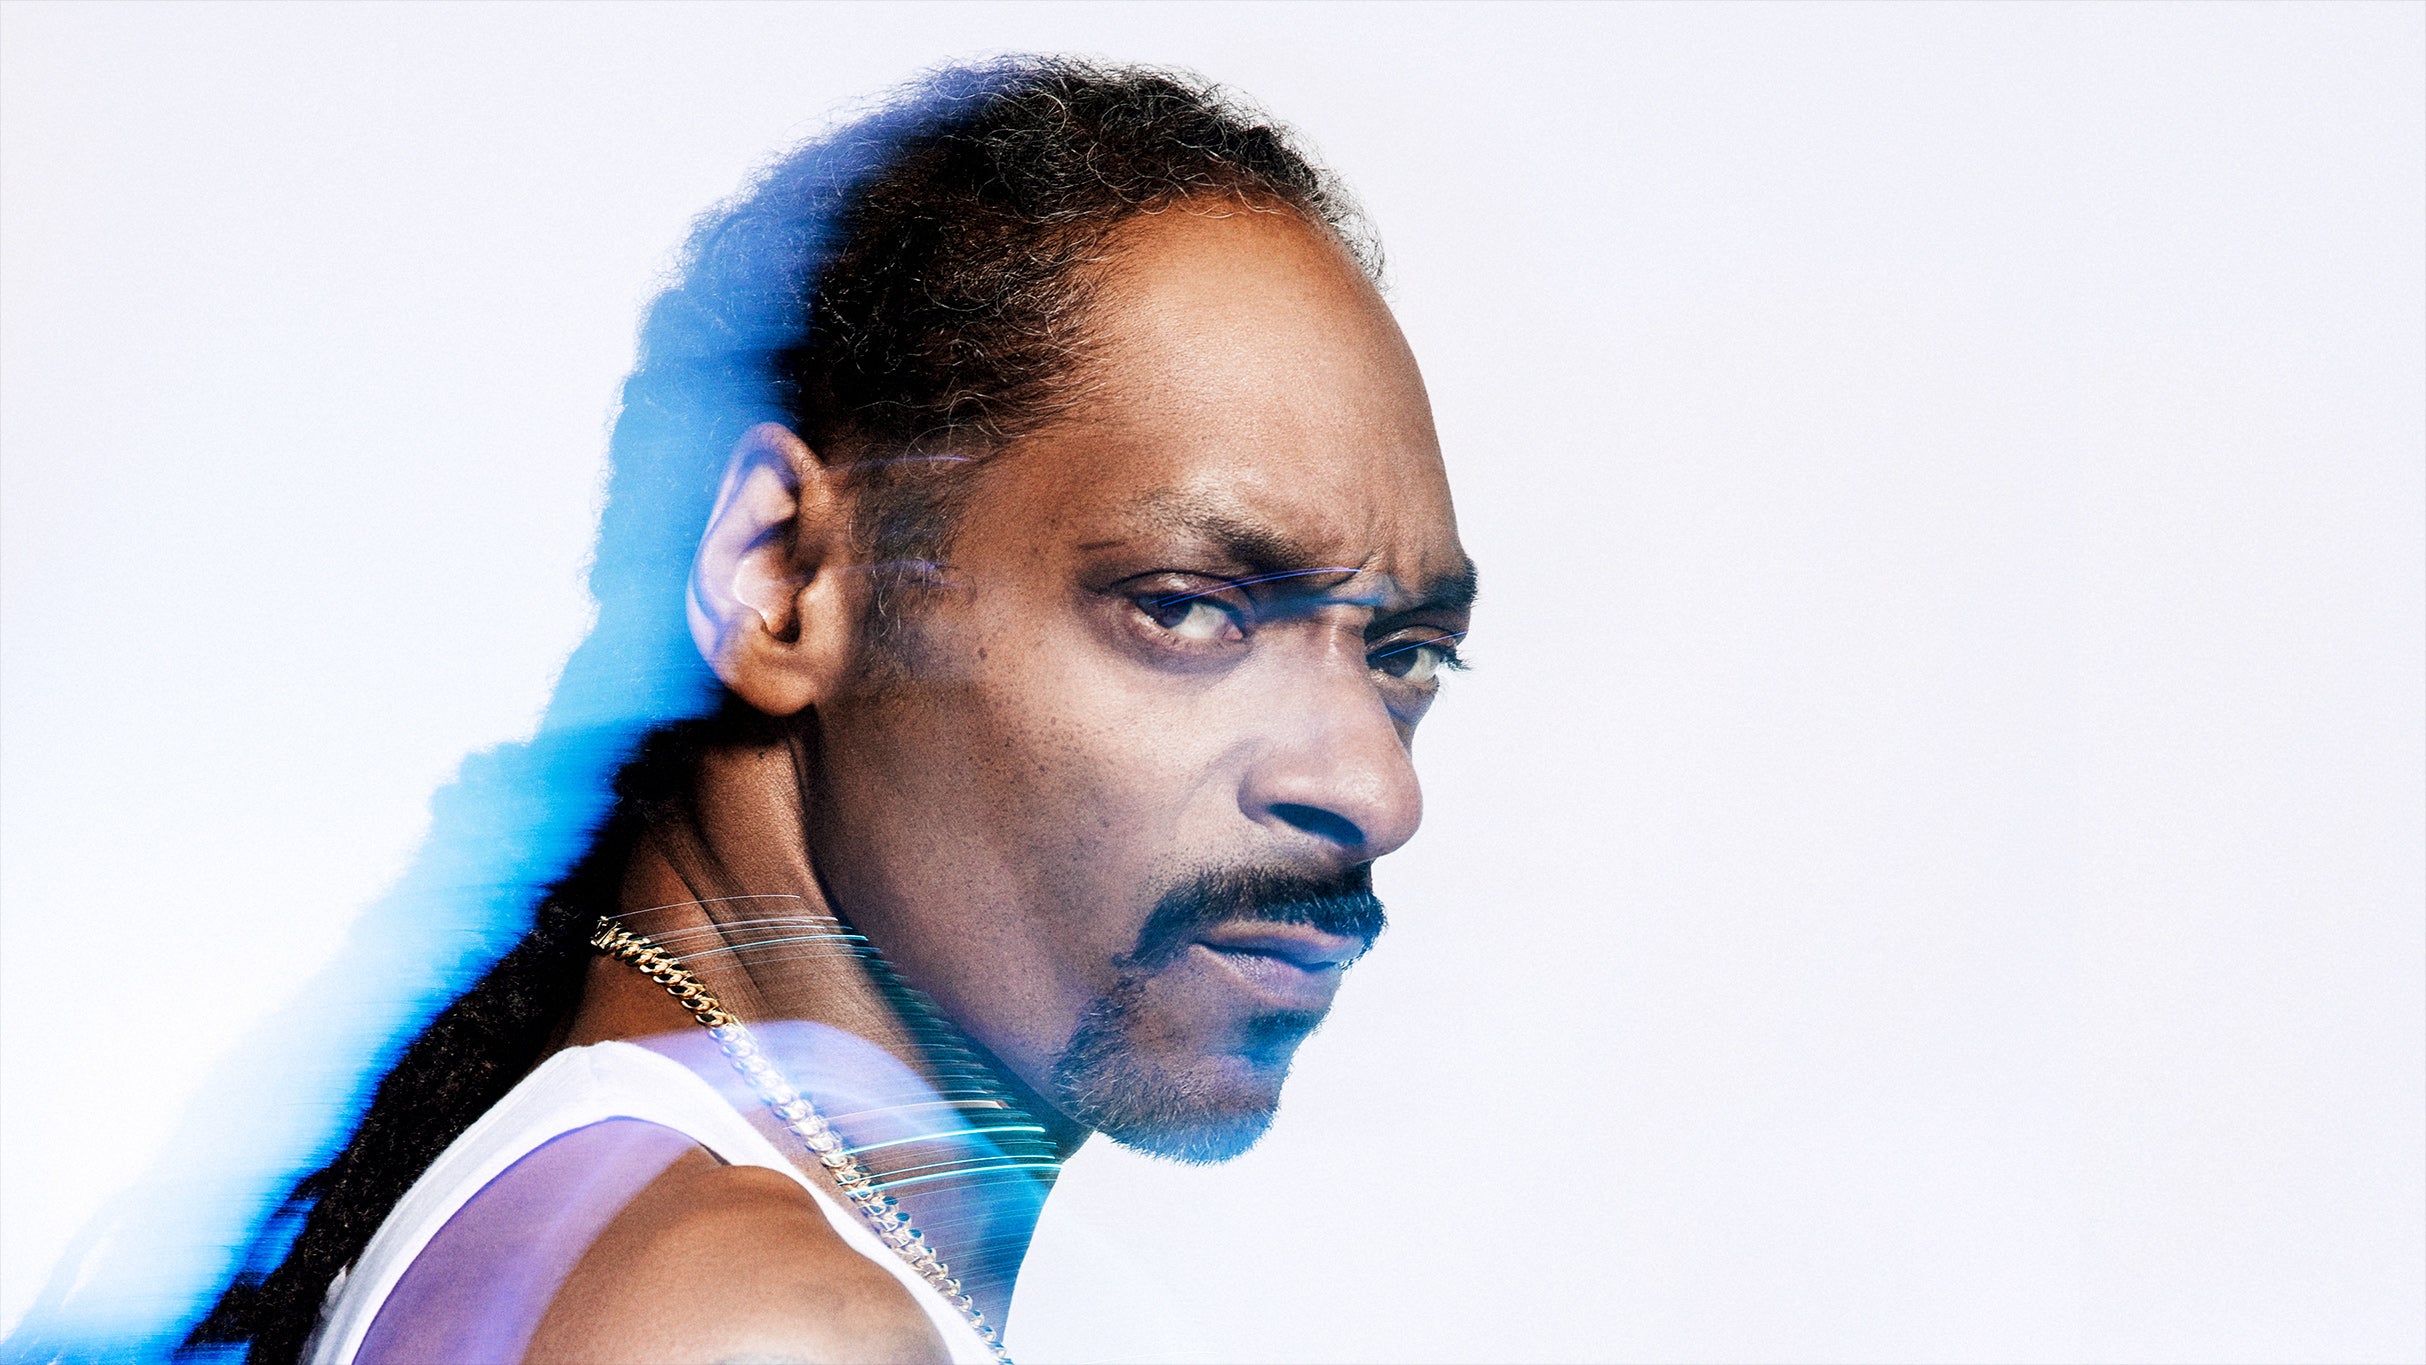 Snoop Dogg - Cali To Canada Tour  pre-sale password for show tickets in Kanata, ON (Canadian Tire Centre)